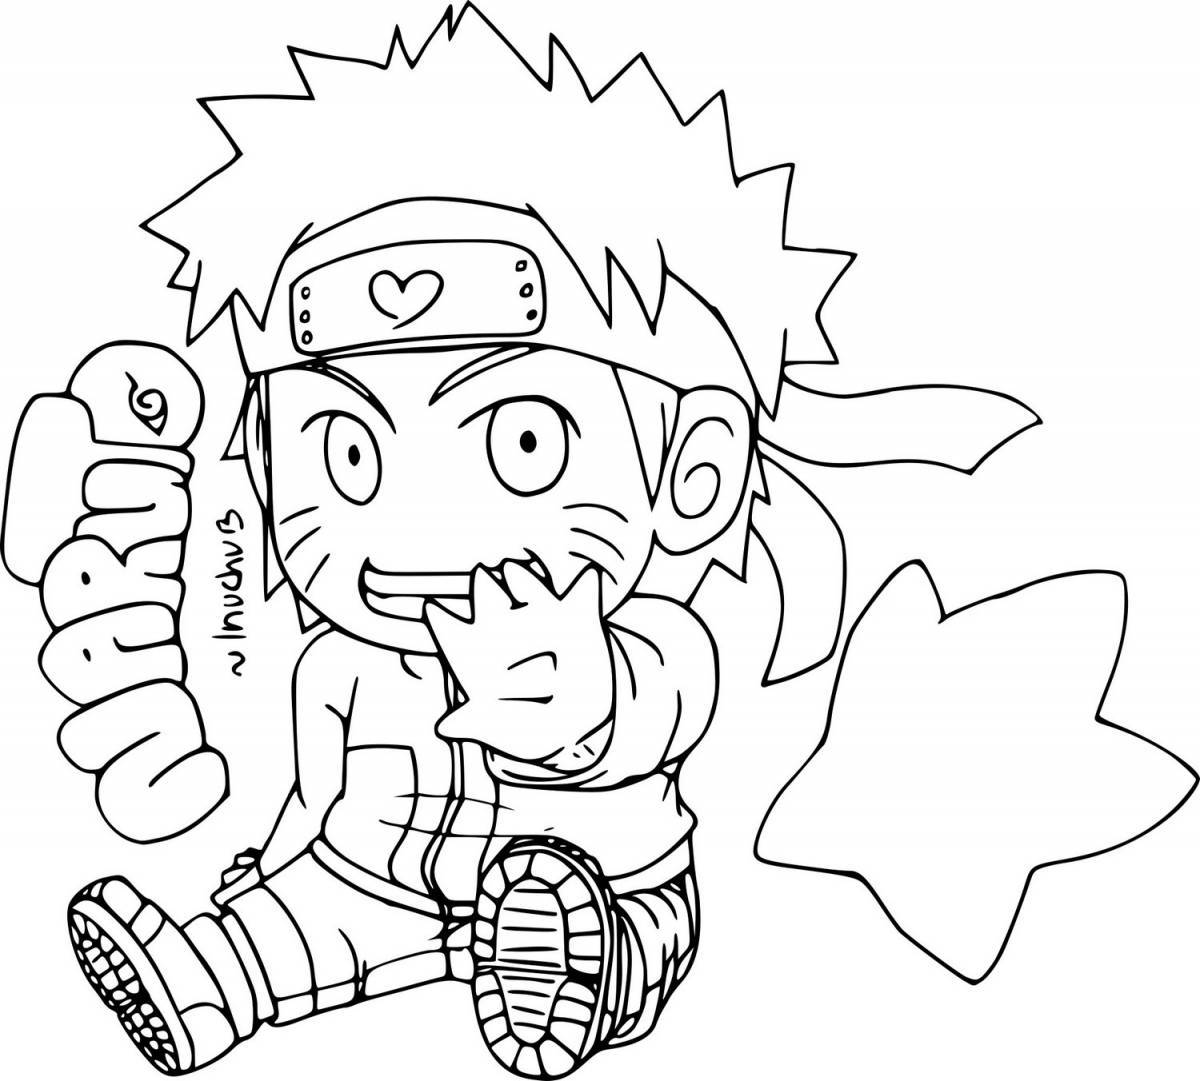 Naruto live coloring for kids